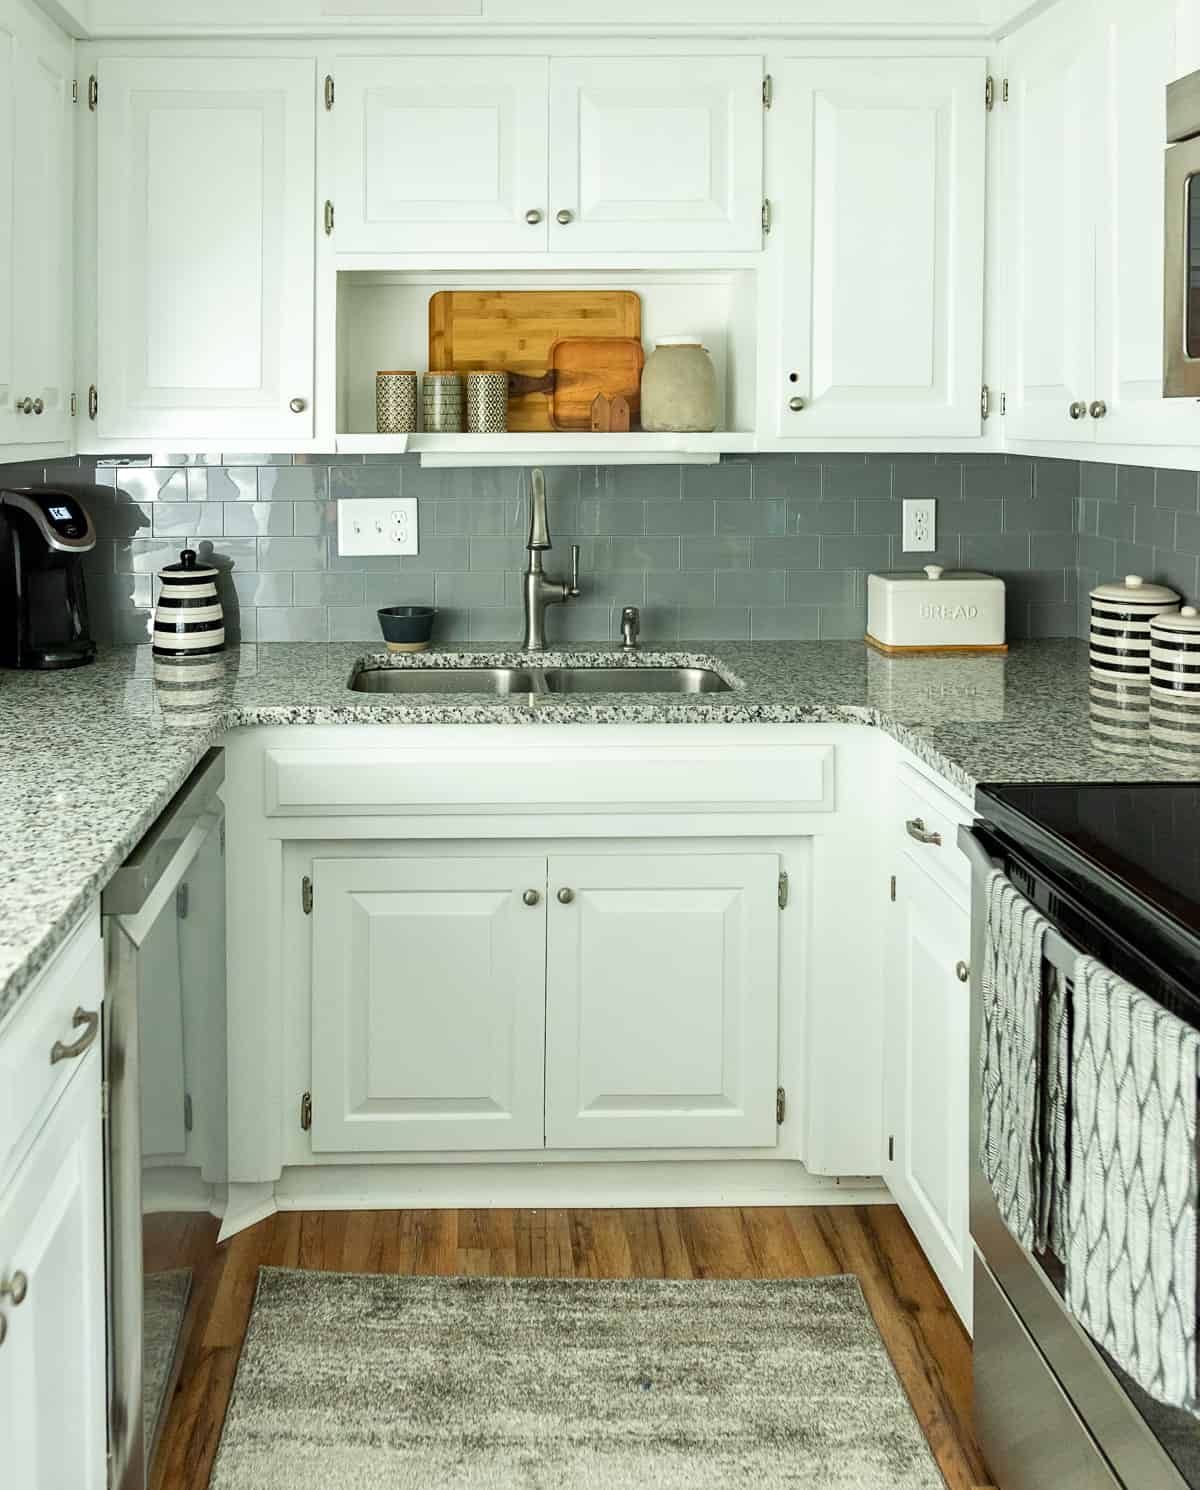 U shaped kitchen with white cabinets and granite counters